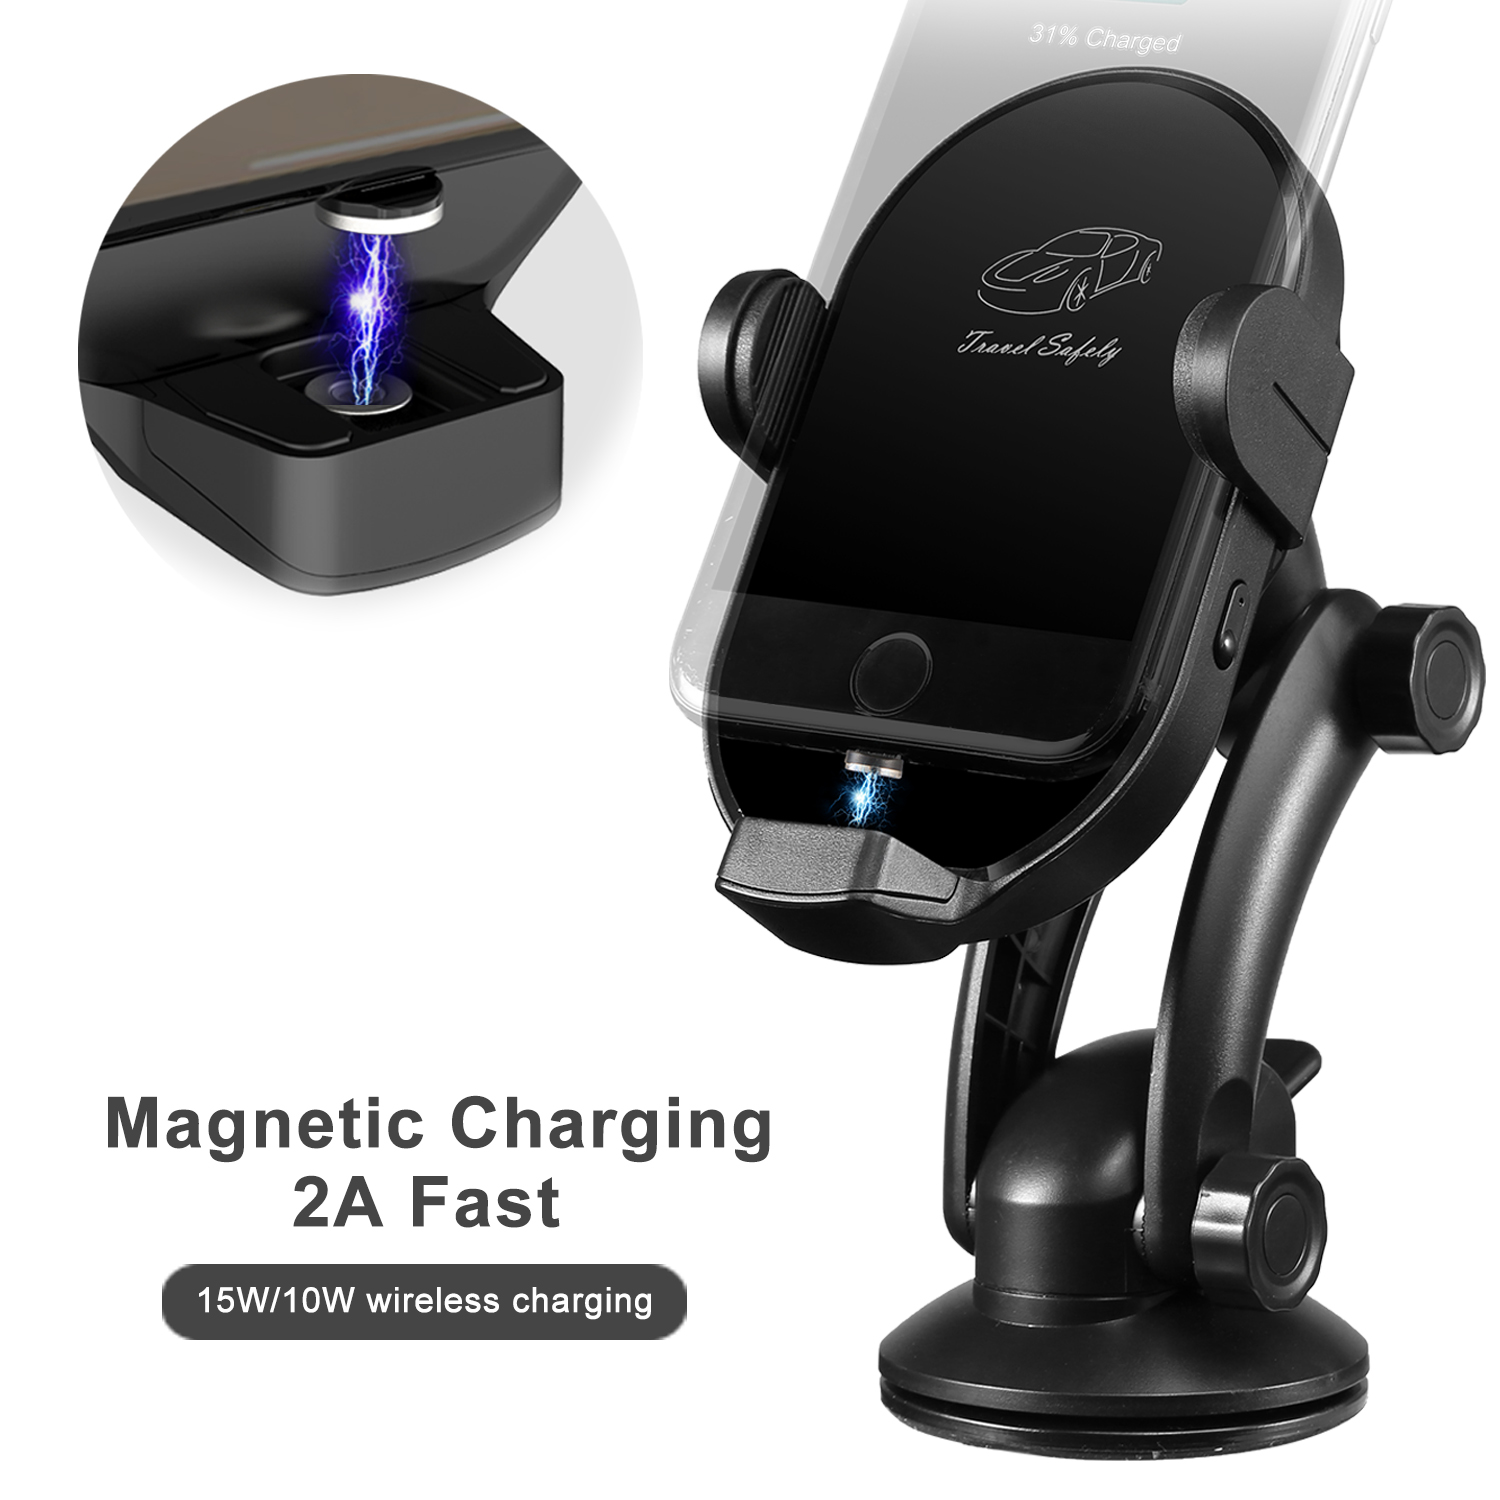 excluding Headphones SHENEN 【2020 Upgraded】 Wireless Car Charger 3 in 1 10W Auto-Clamping Qi Fast Charging Car Mount Charger Air Vent Phone Holder for All Smartphones and Original TWS Headphones